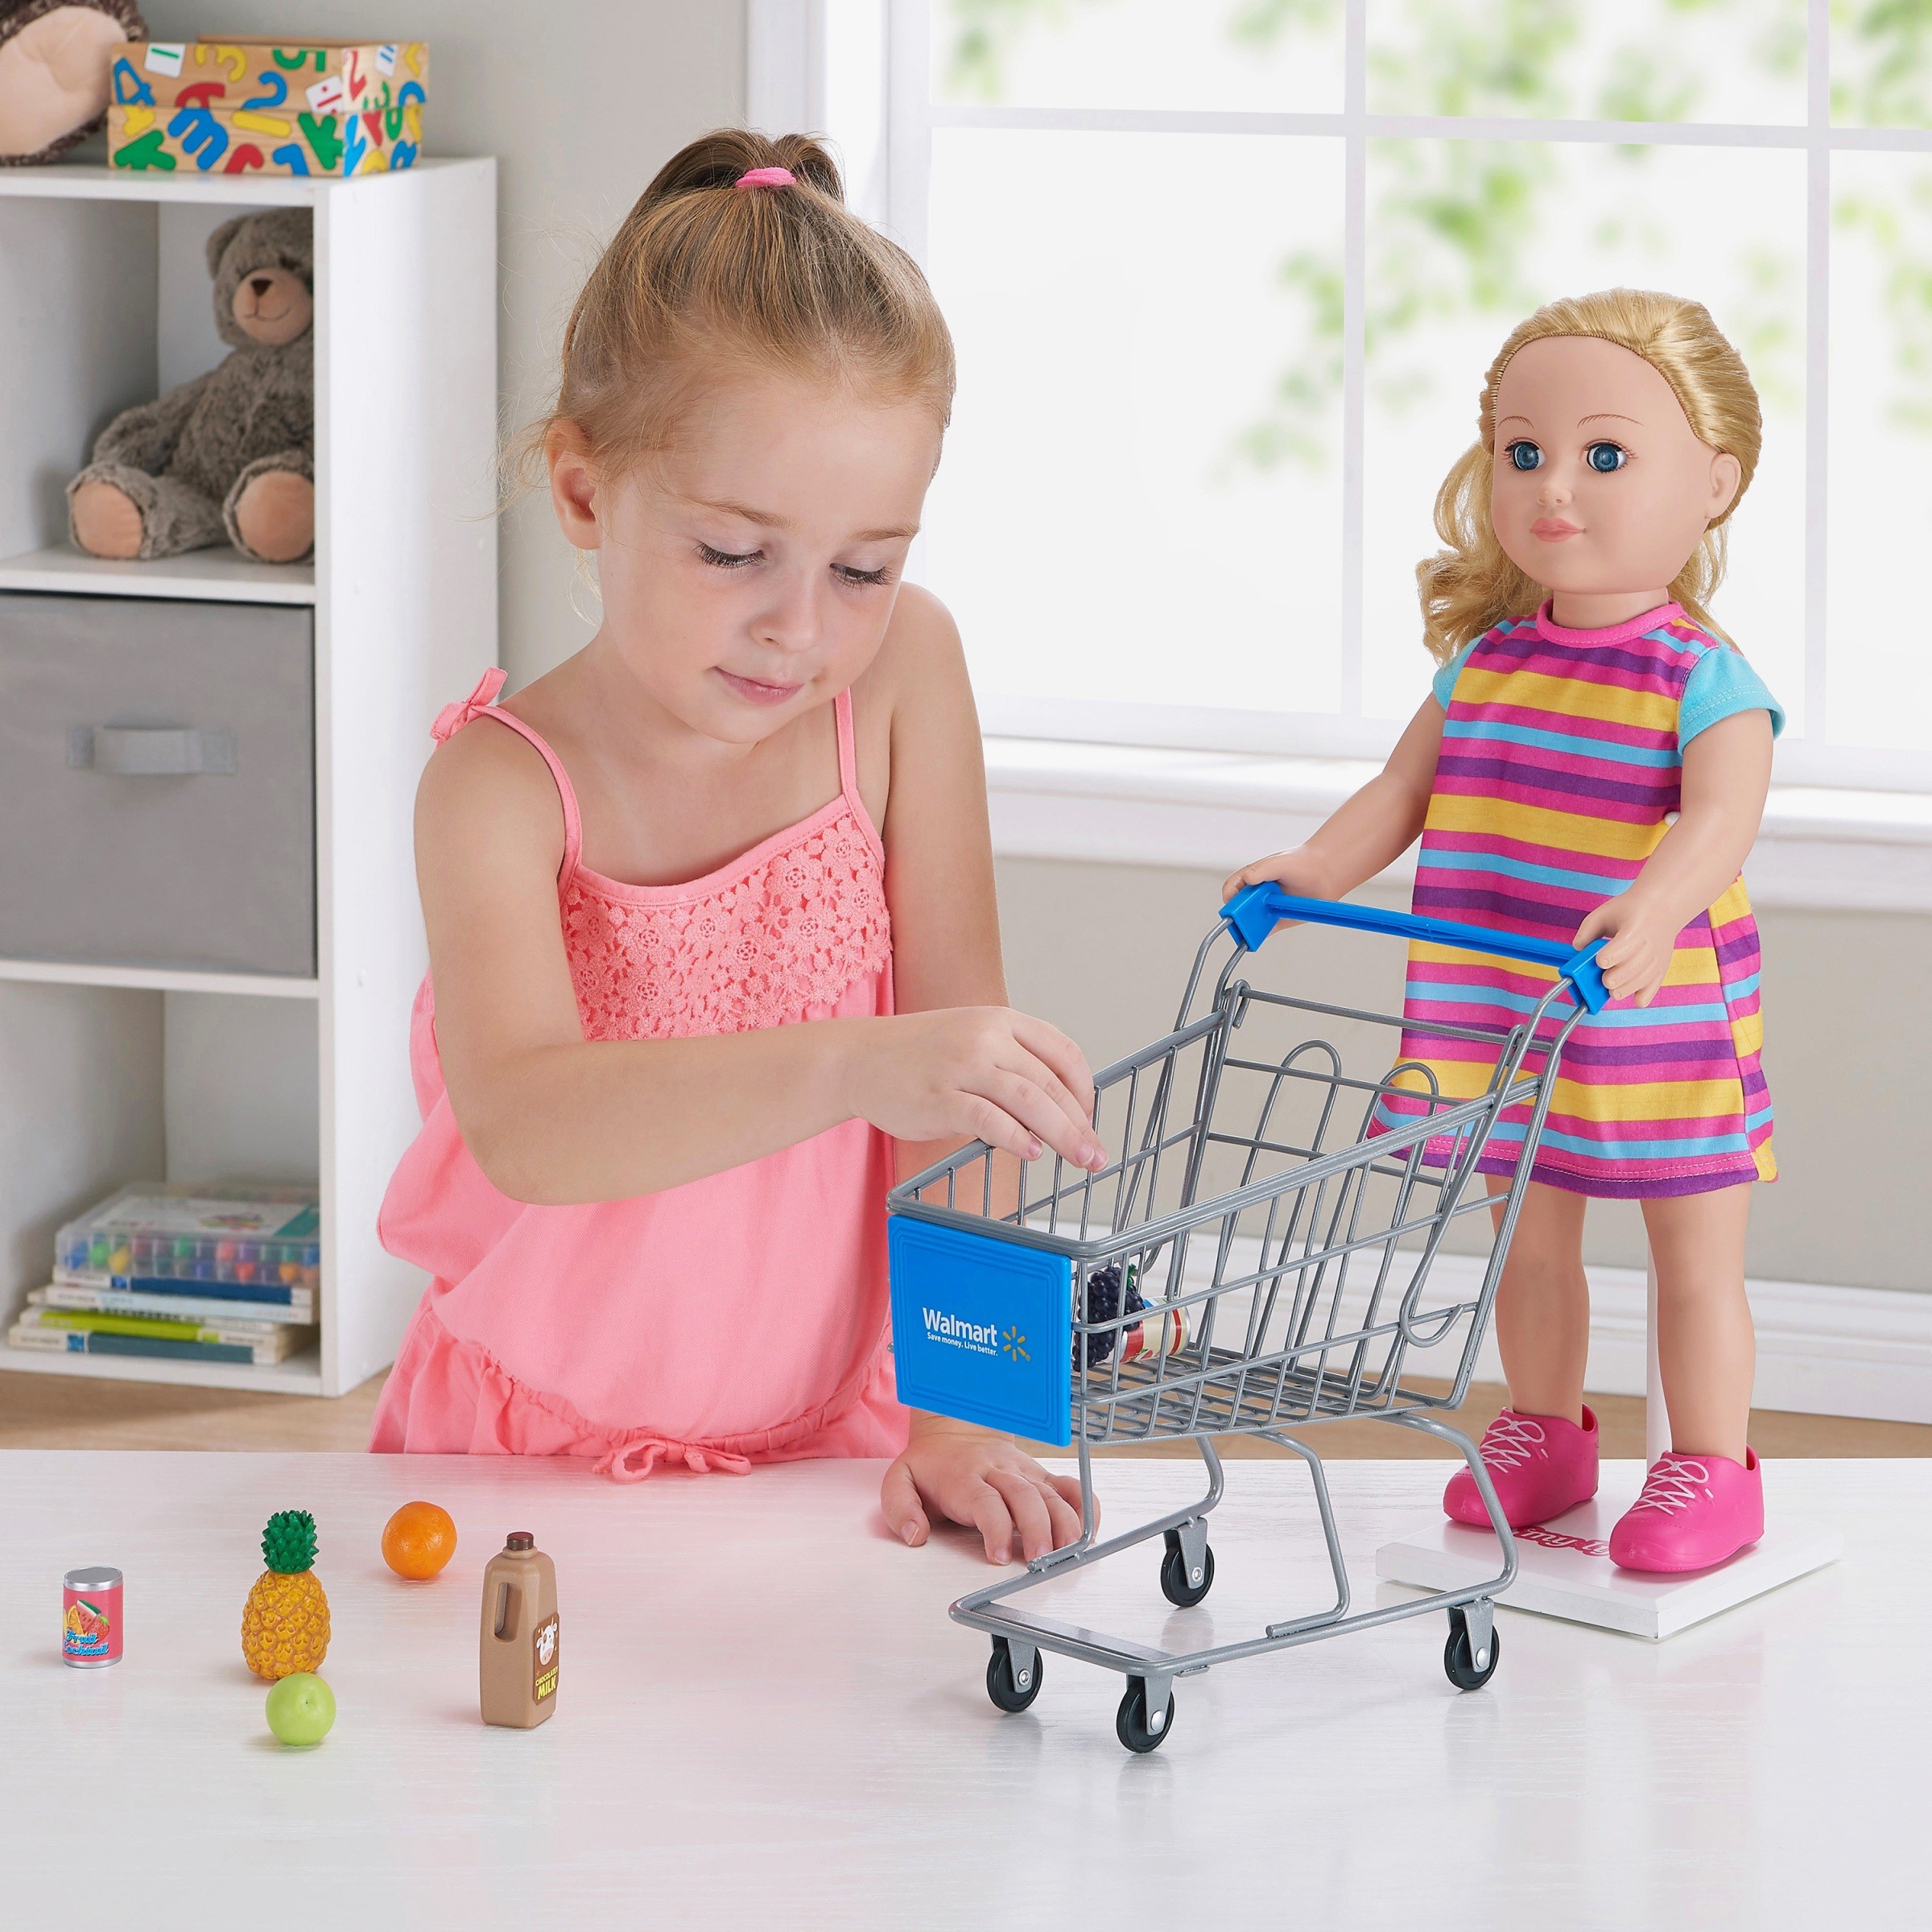 My Life As Shopping Cart, Walmart Logo, Accessory for 18" Dolls - image 2 of 2